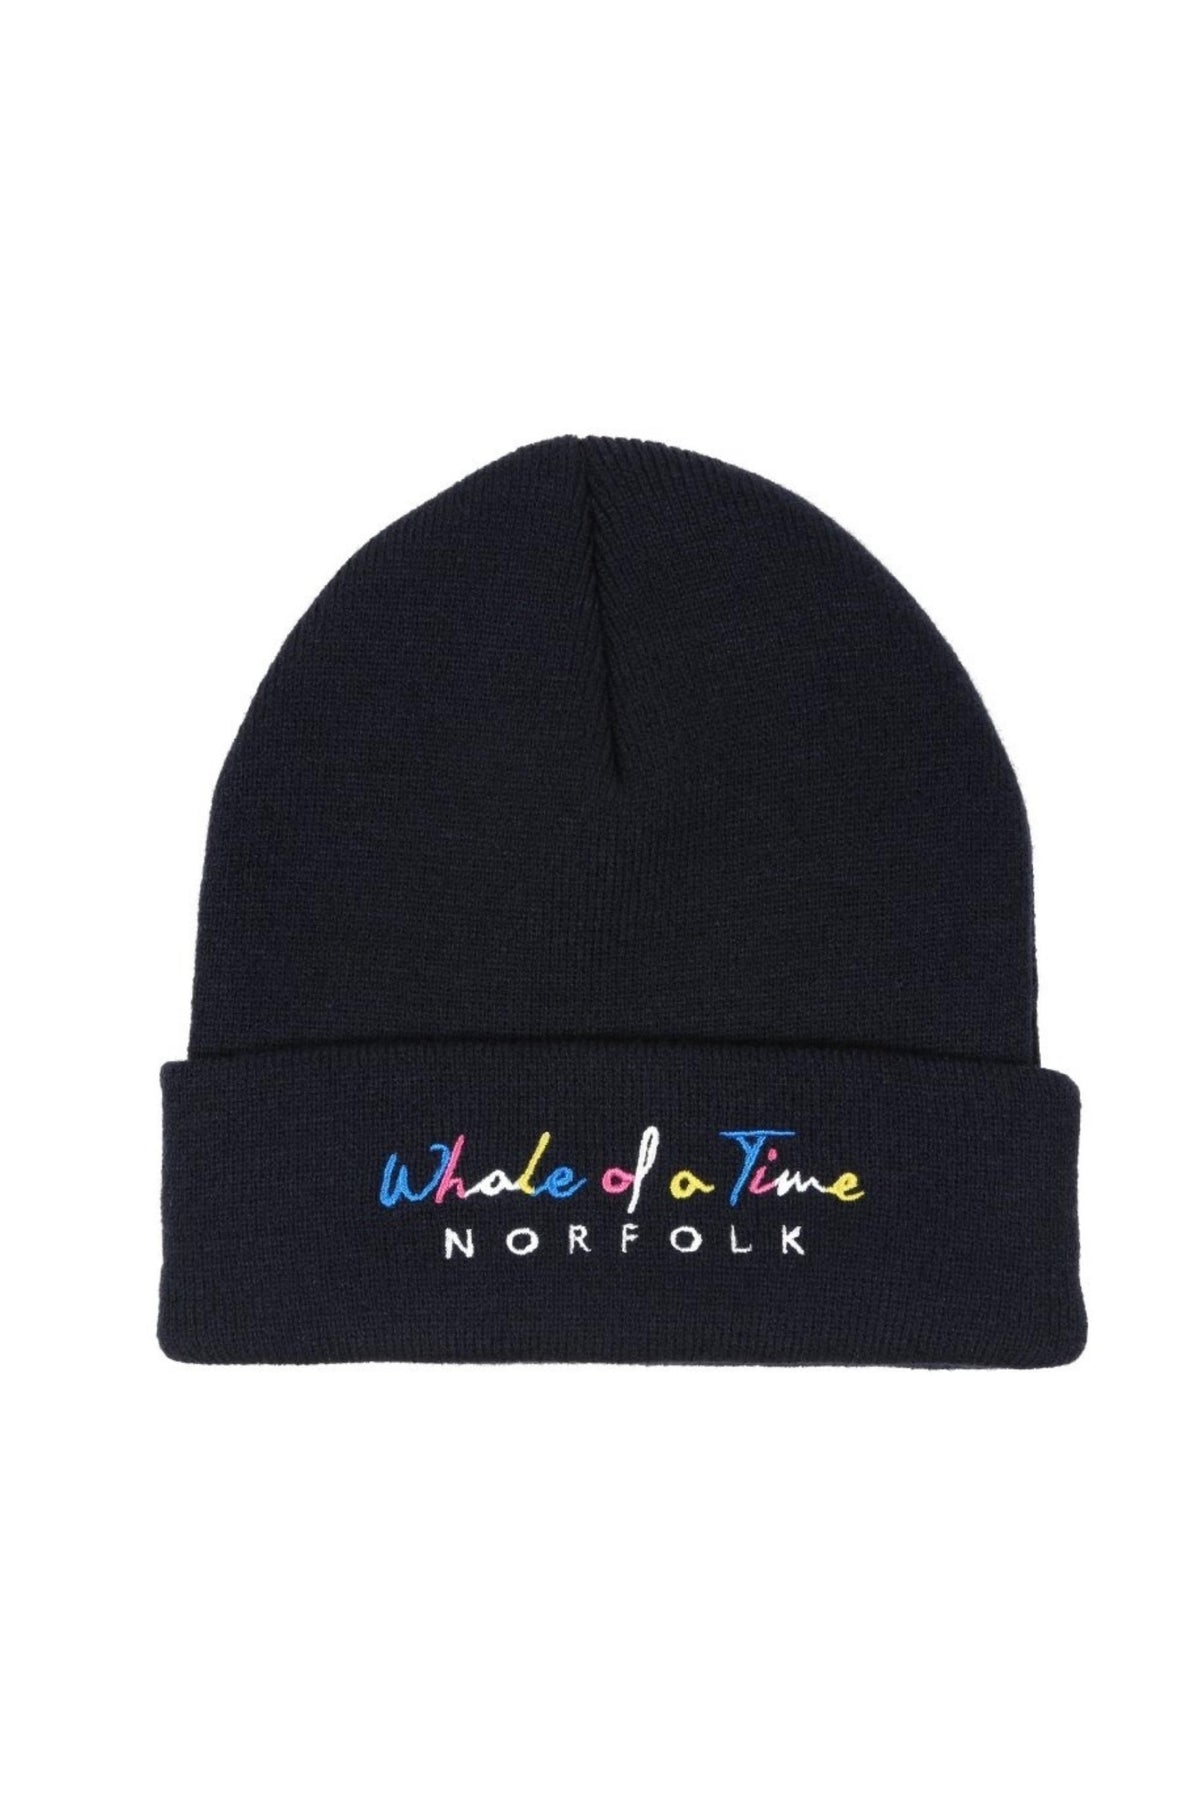 Basics Beanie - Navy - Whale Of A Time Clothing